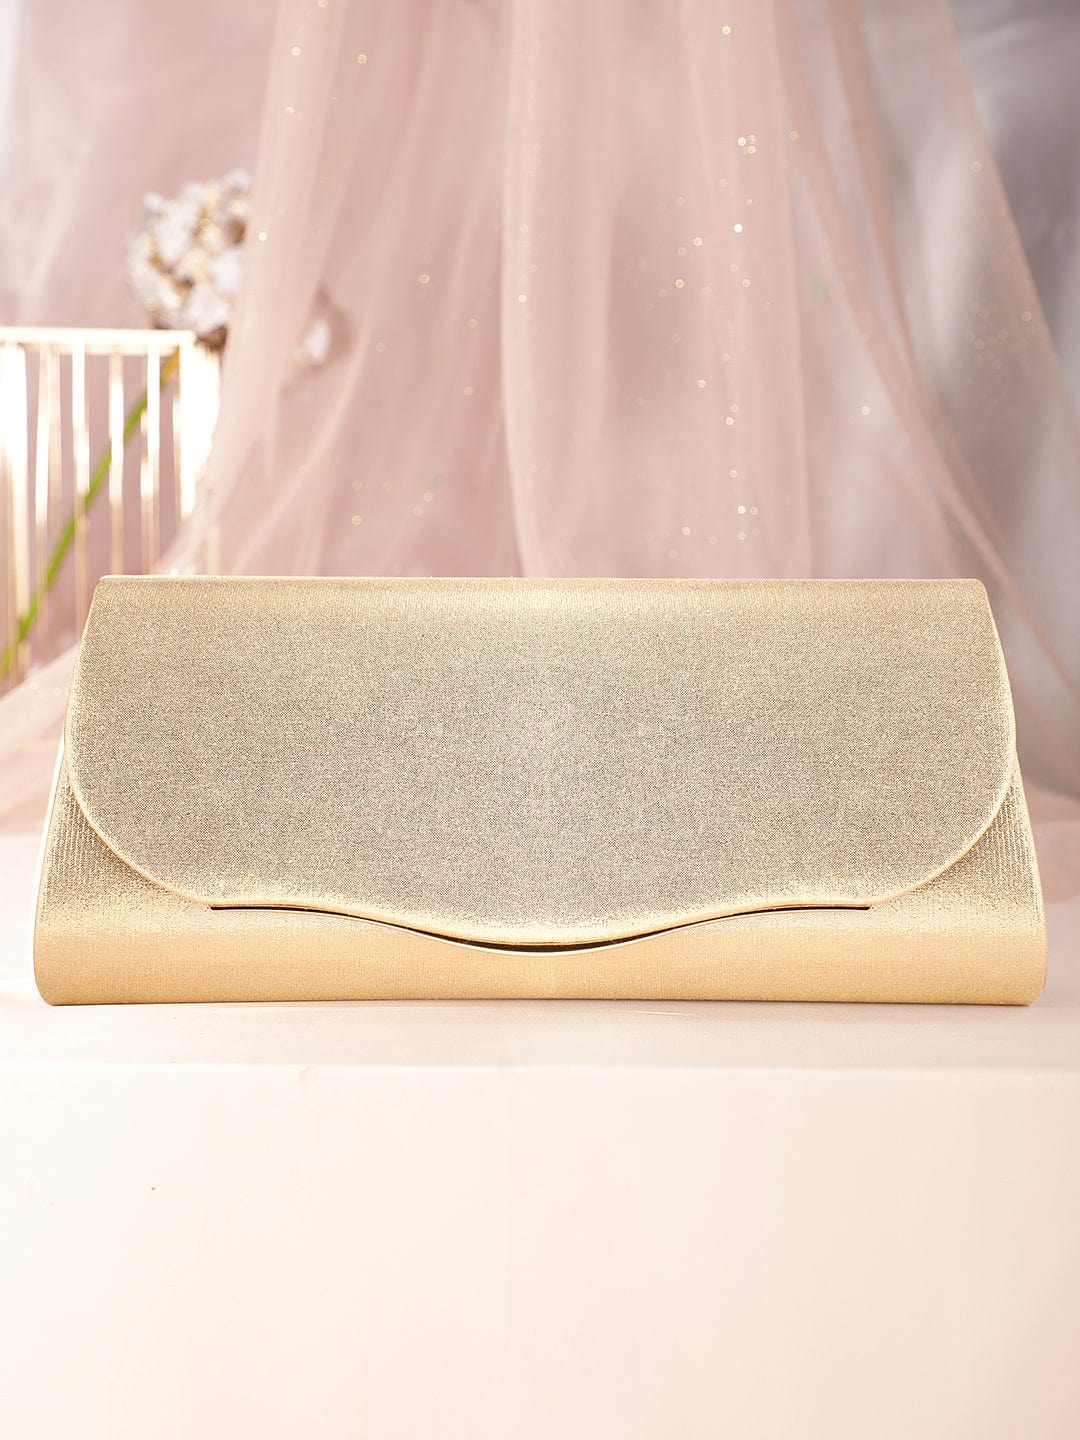 Rubans Radiant Sophistication Handcrafted Champagne Glossy Finish Clutch Bag Handbag, Wallet Accessories & Clutches